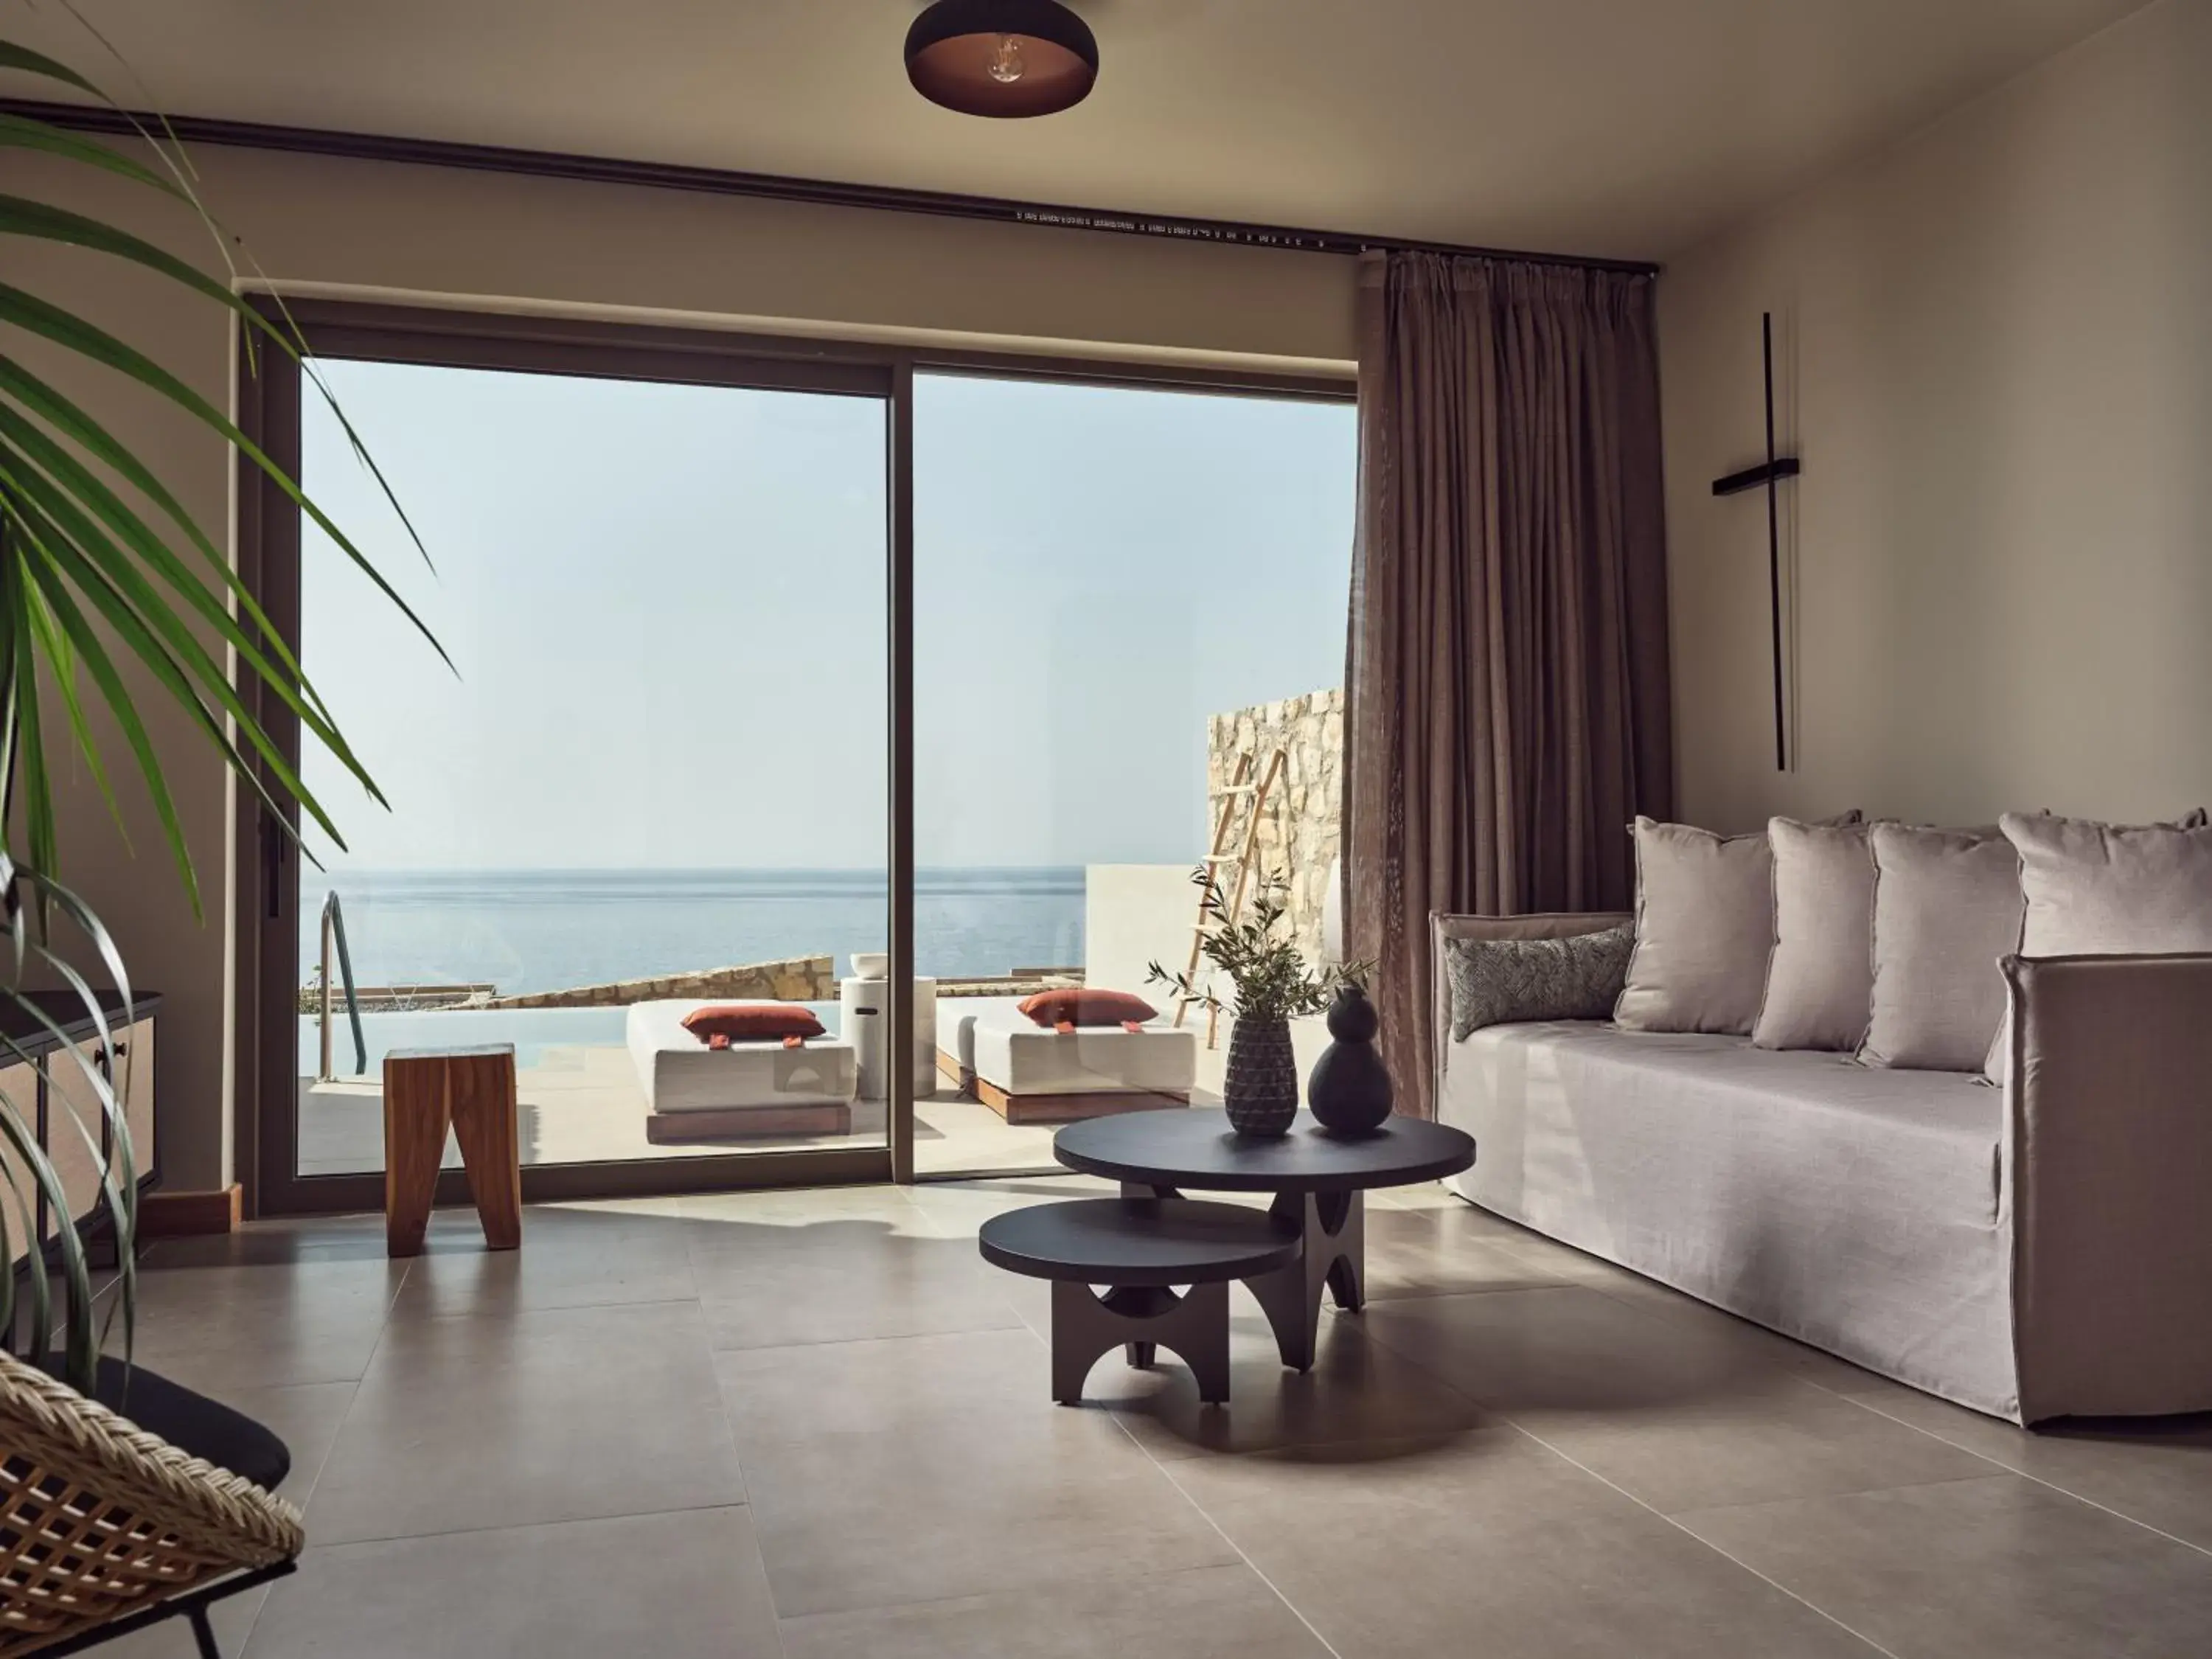 Living room in The Royal Senses Resort Crete, Curio Collection by Hilton